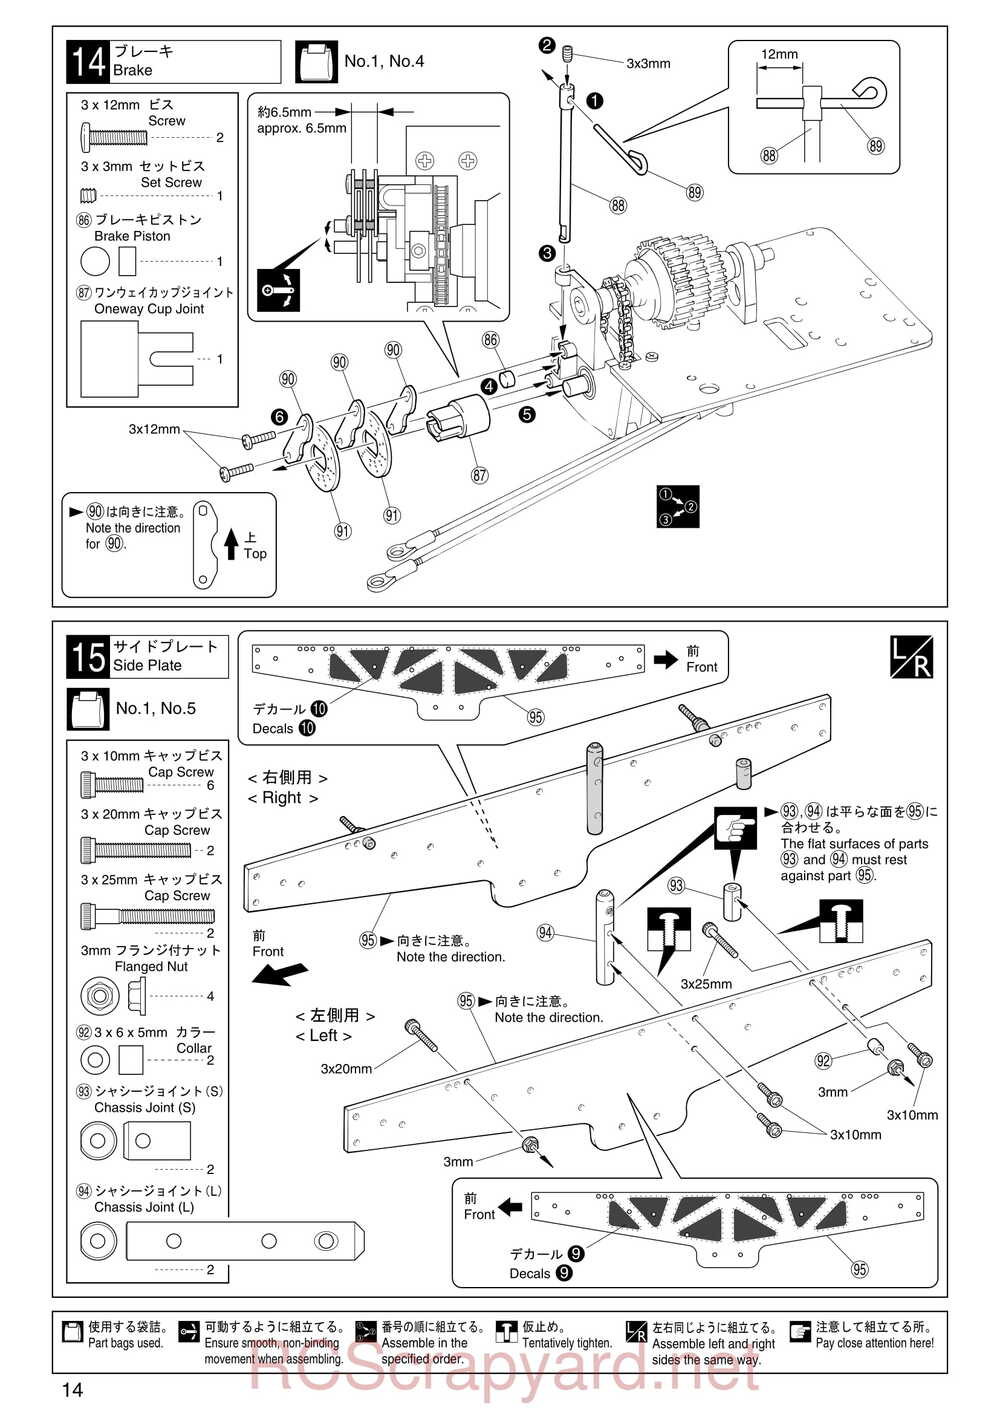 Kyosho - 31224 - Mad-Armour - Manual - Page 14